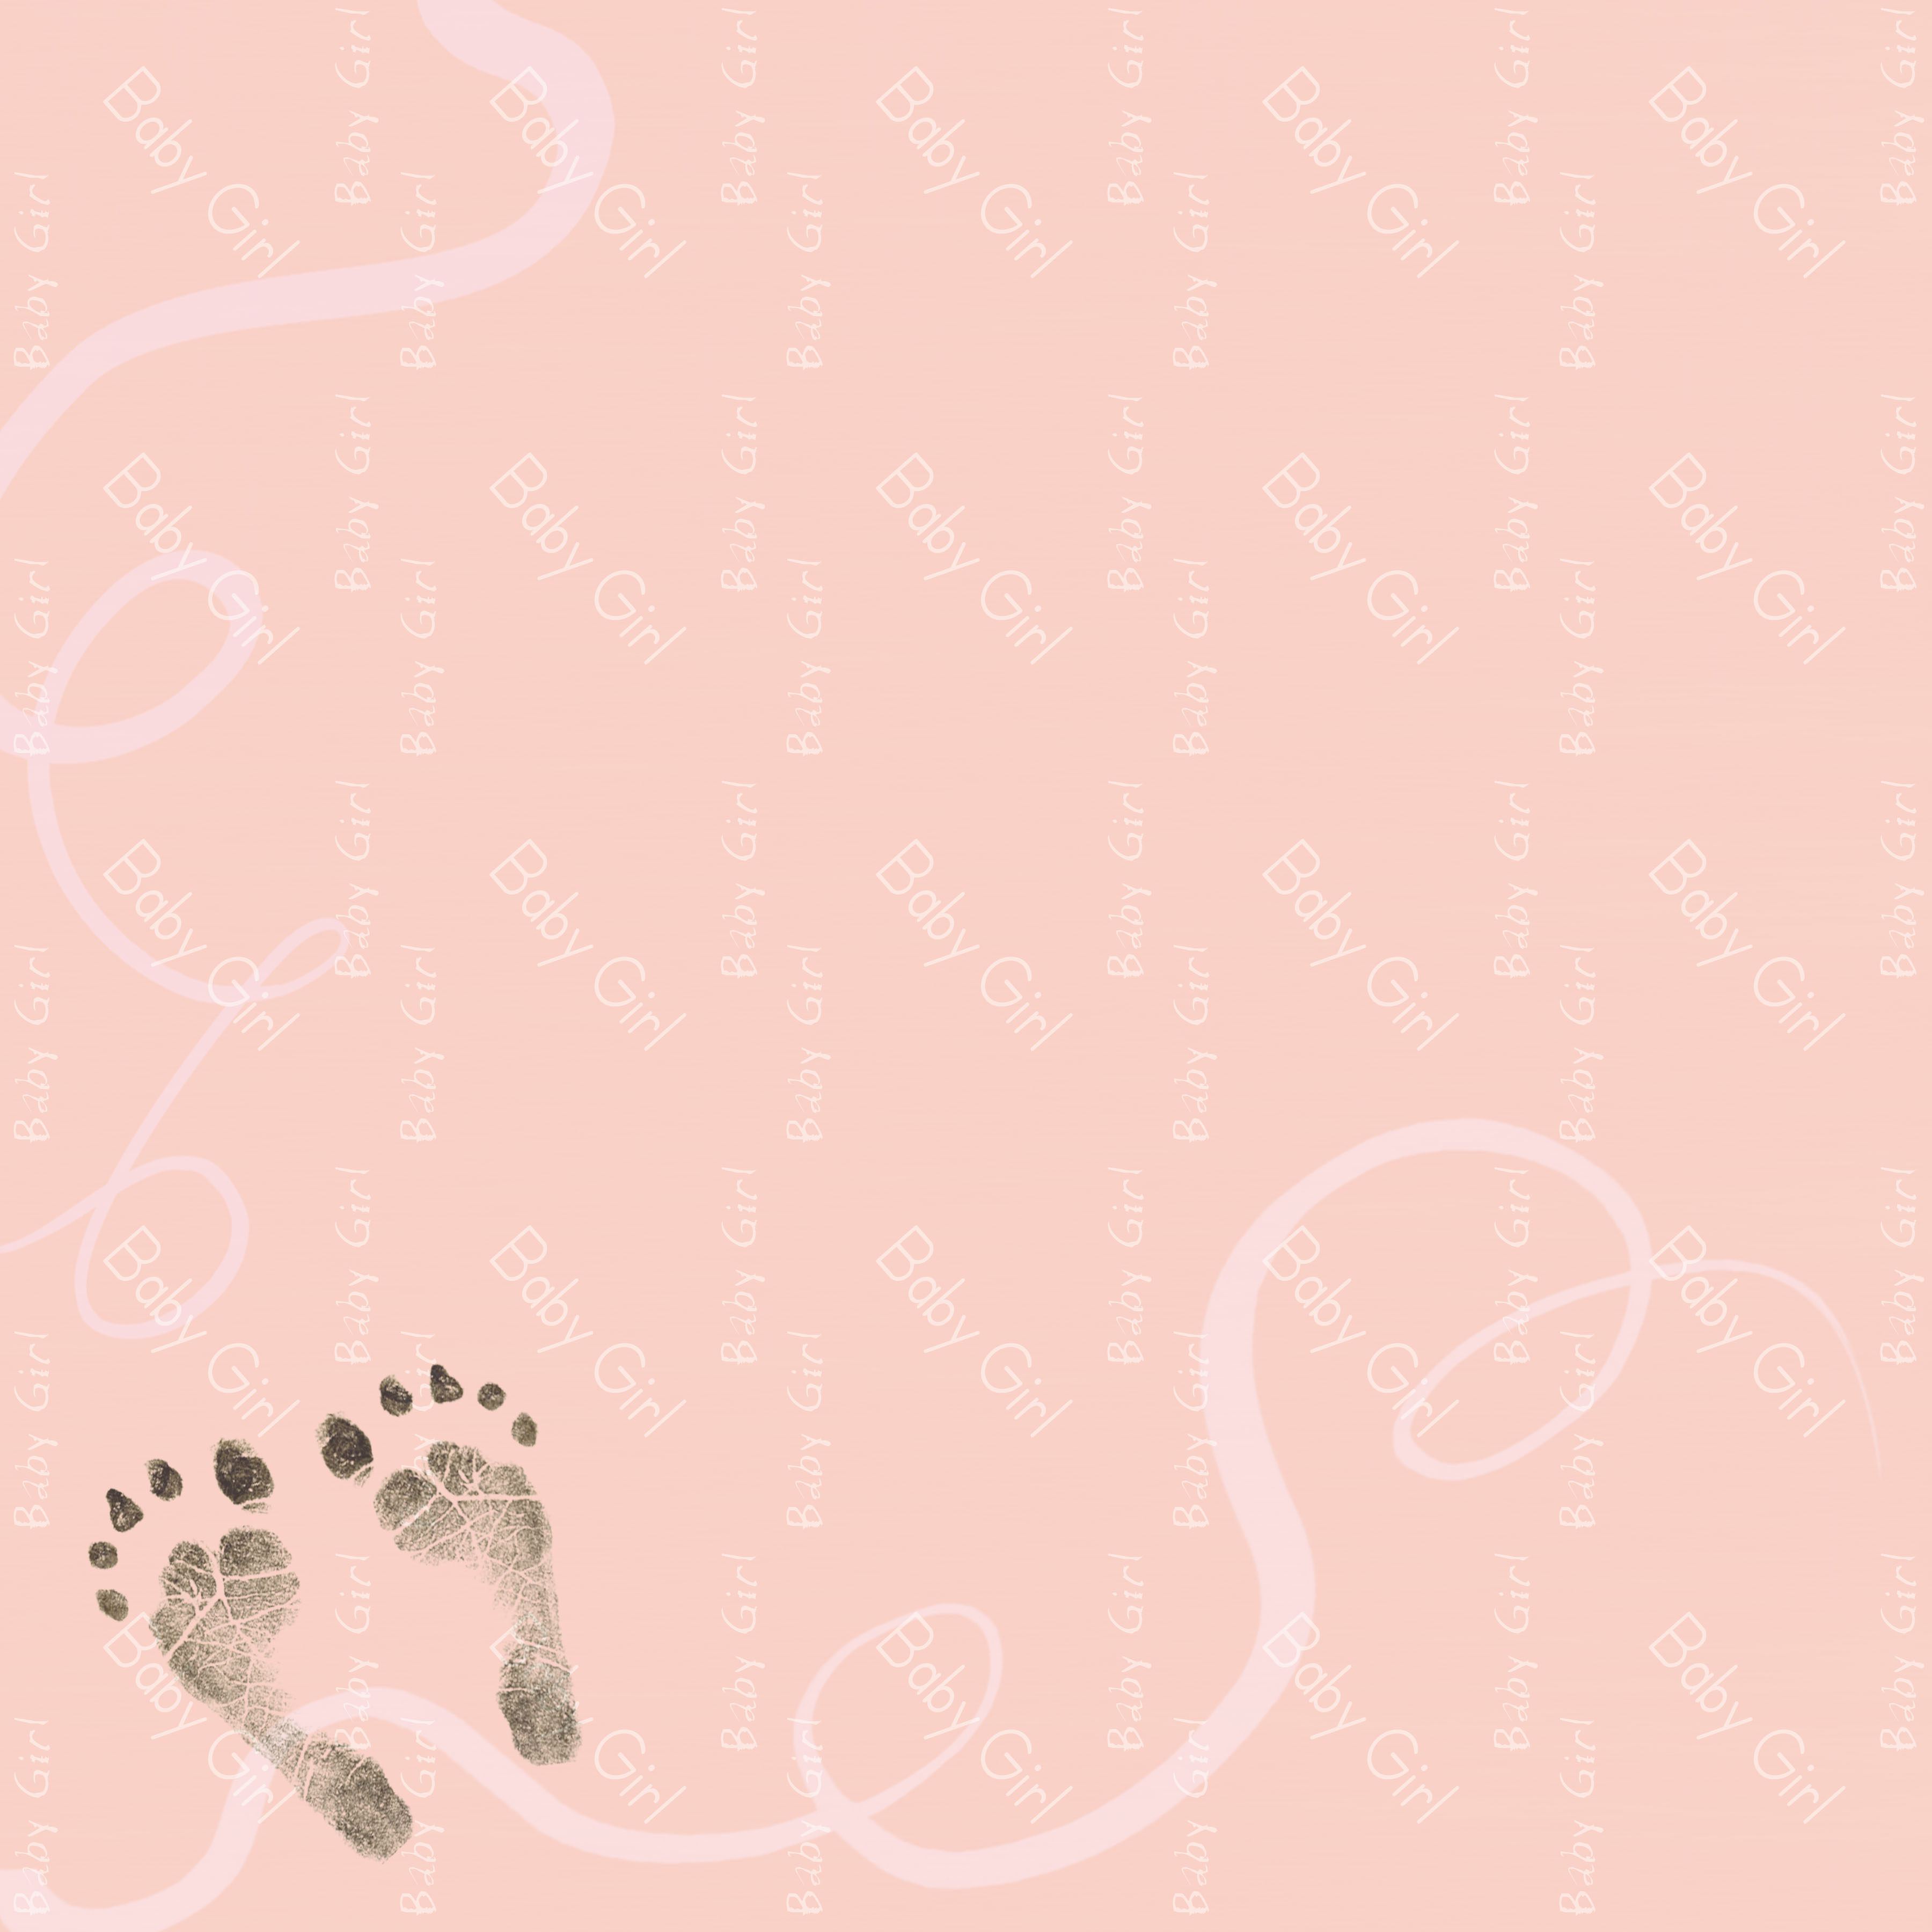 Backgrounds For Baby Pictures Safari